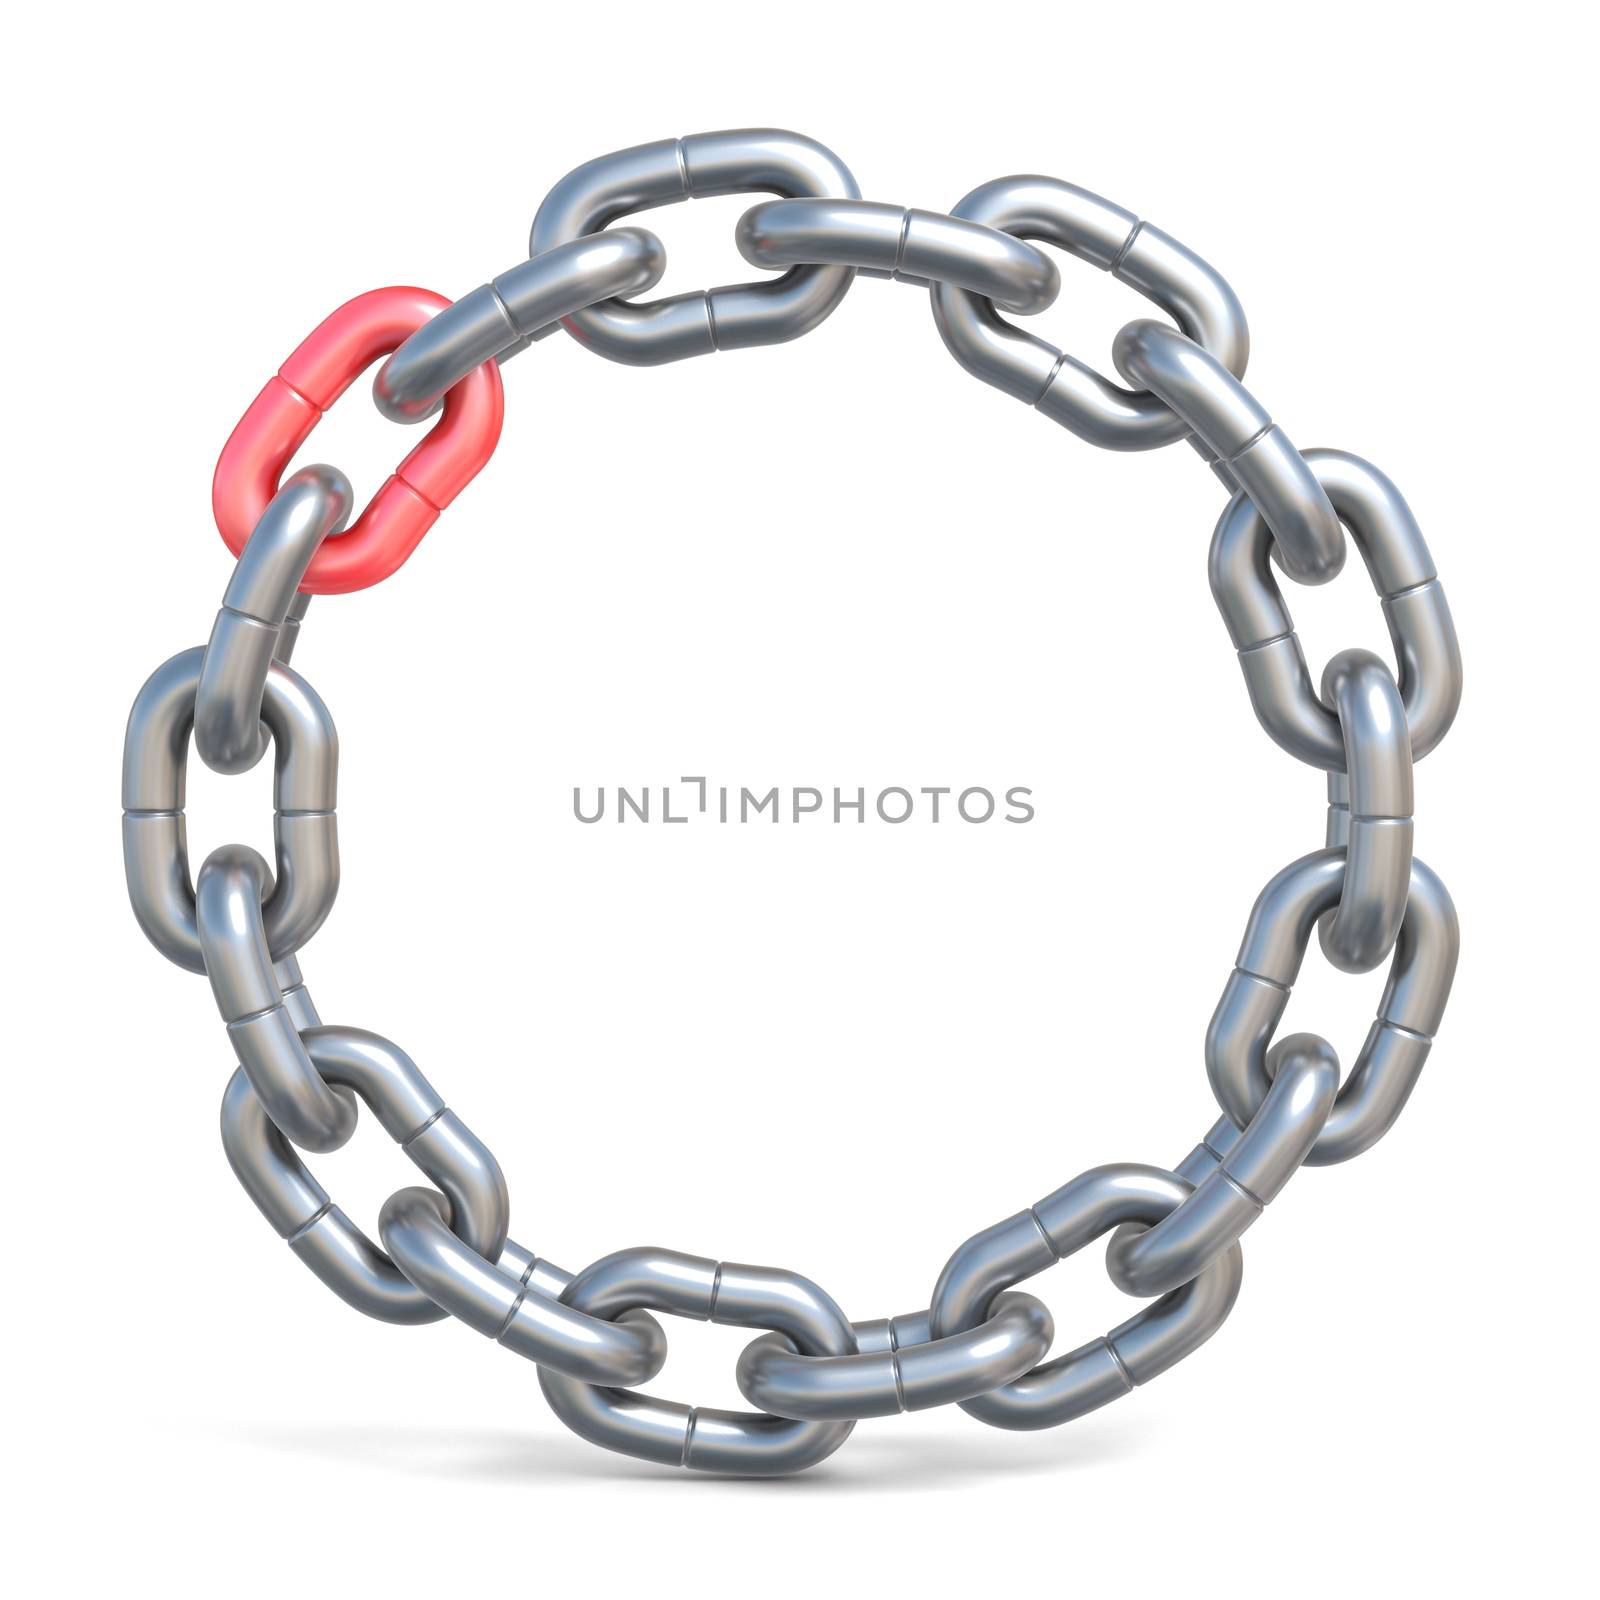 Circle chain with one red link 3D render illustration isolated on white background